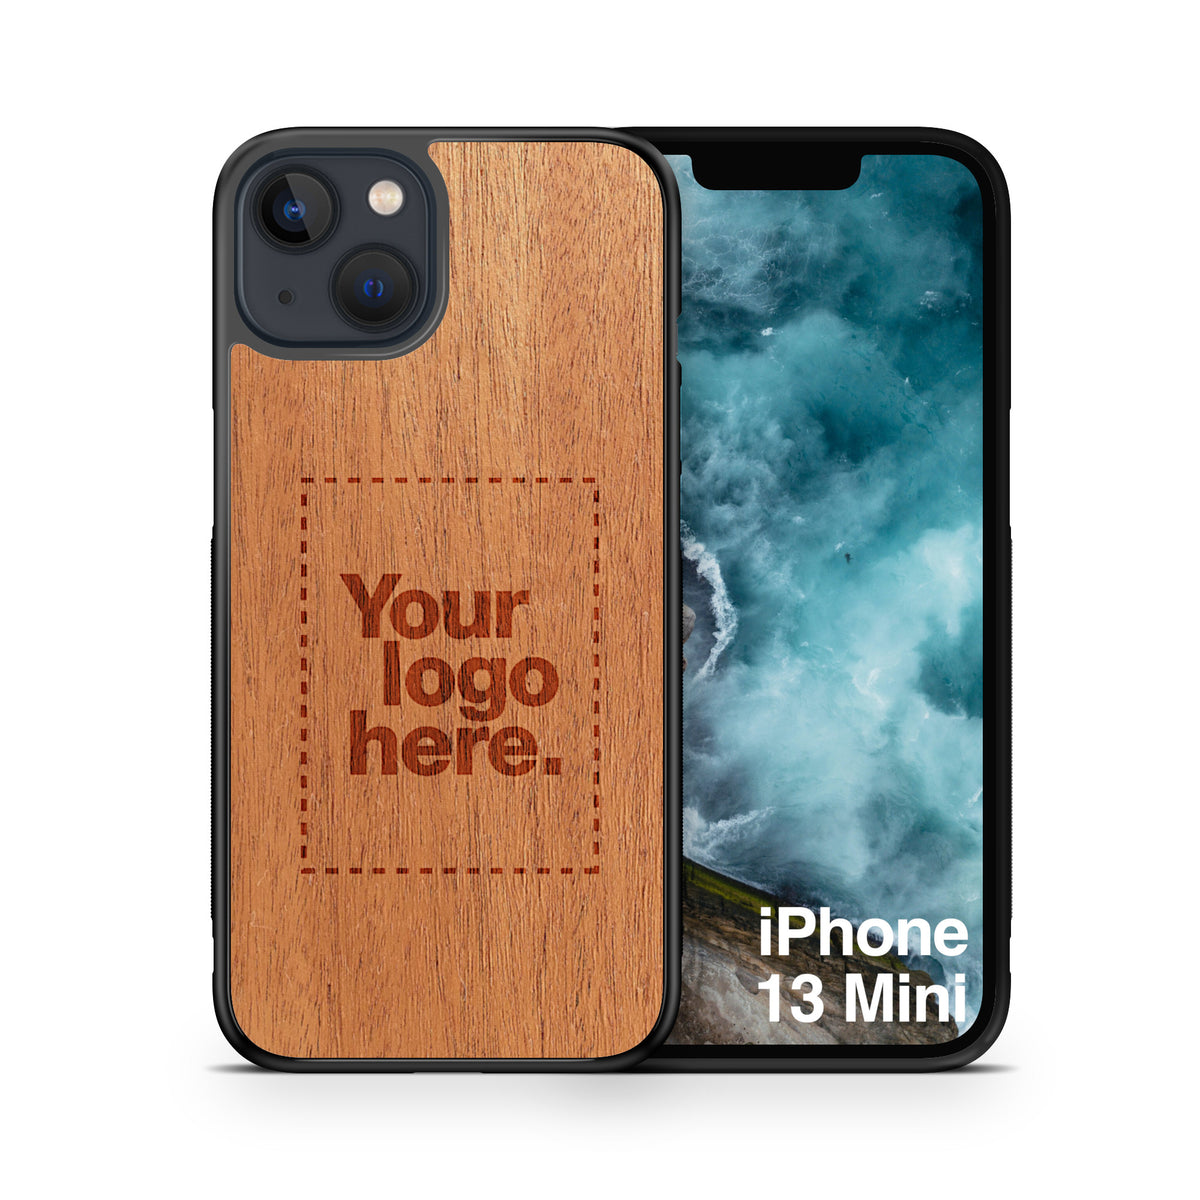 Custom carved burnt customized personalized laser engraved wooden Apple iPhone 13 Mini